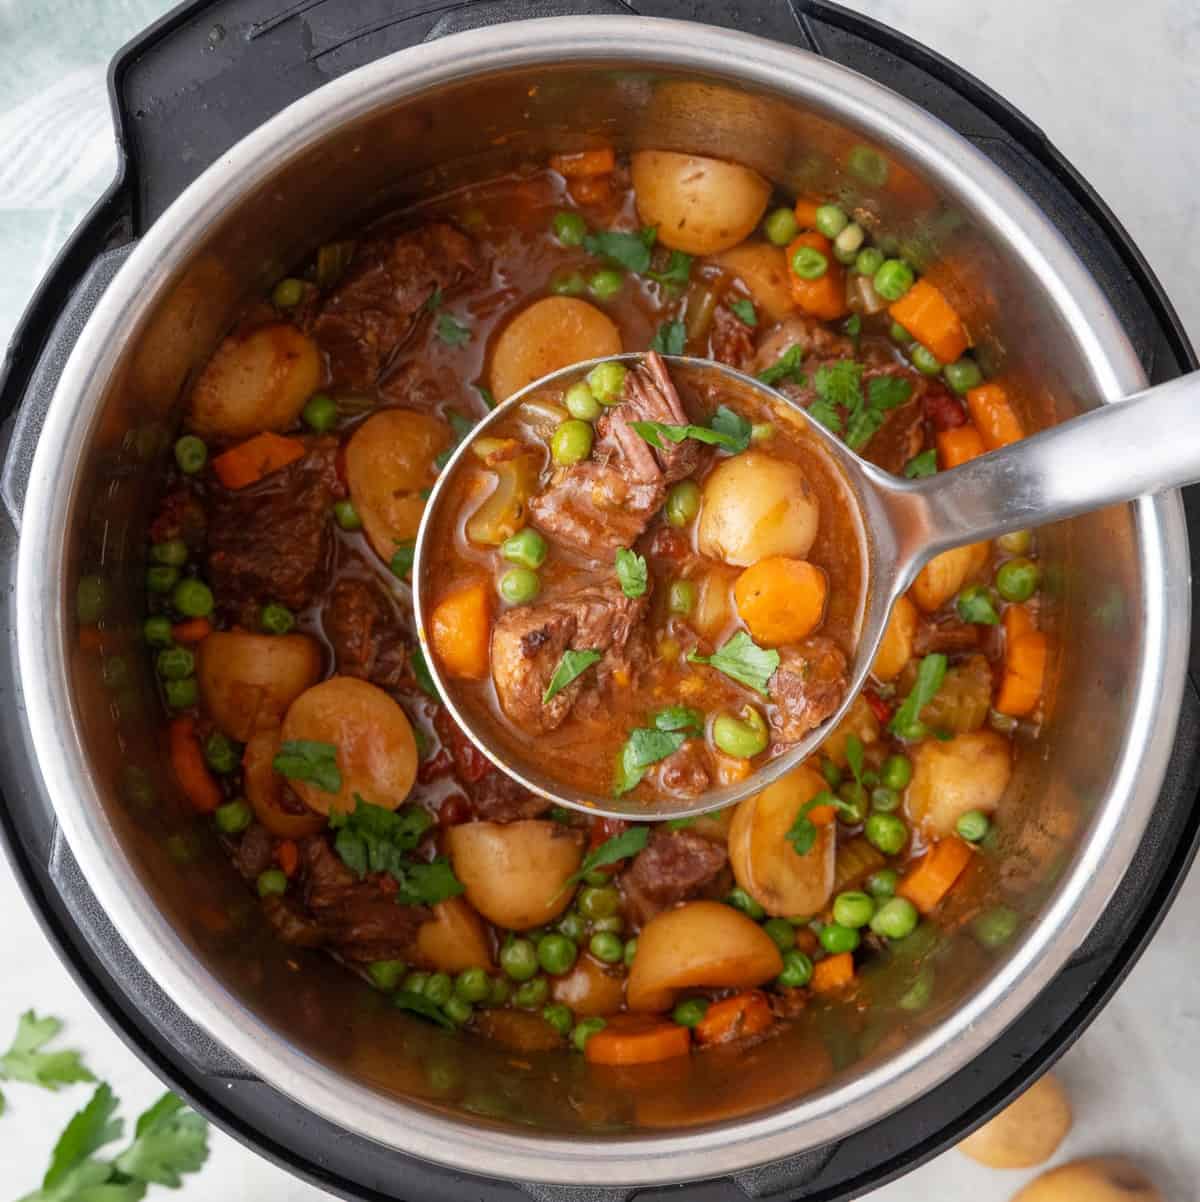 Ladle scooping up a serving of beef stew from Instant Pot.